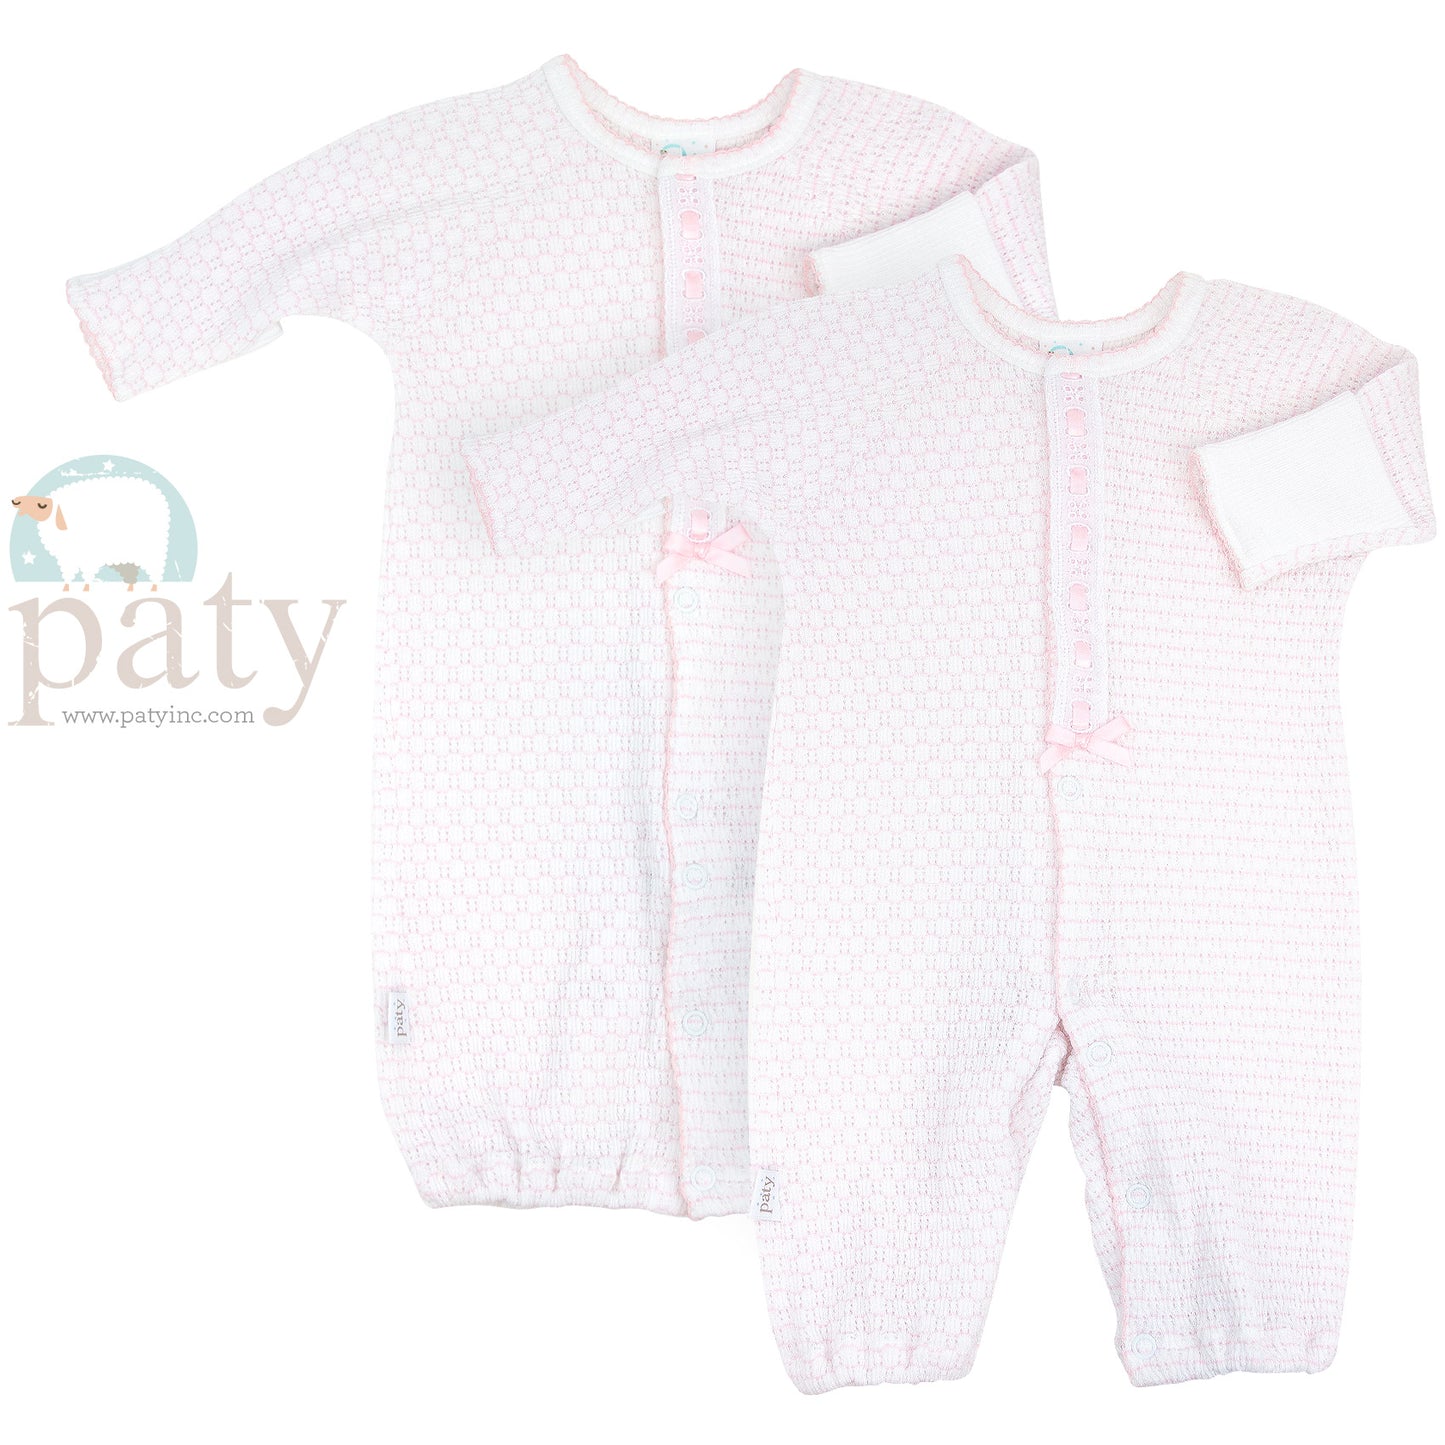 Pinstripe Paty Knit LS Converter with Eyelet Trim | Pink